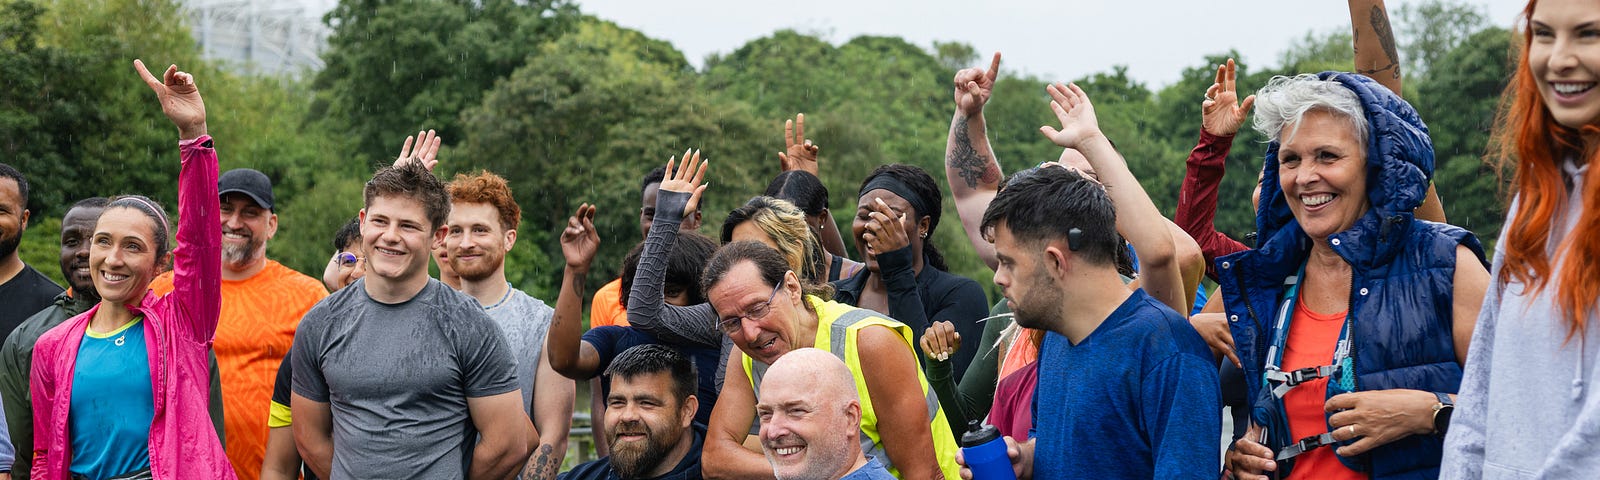 Fun run participants in Leazes Park in Newcastle upon Tyne